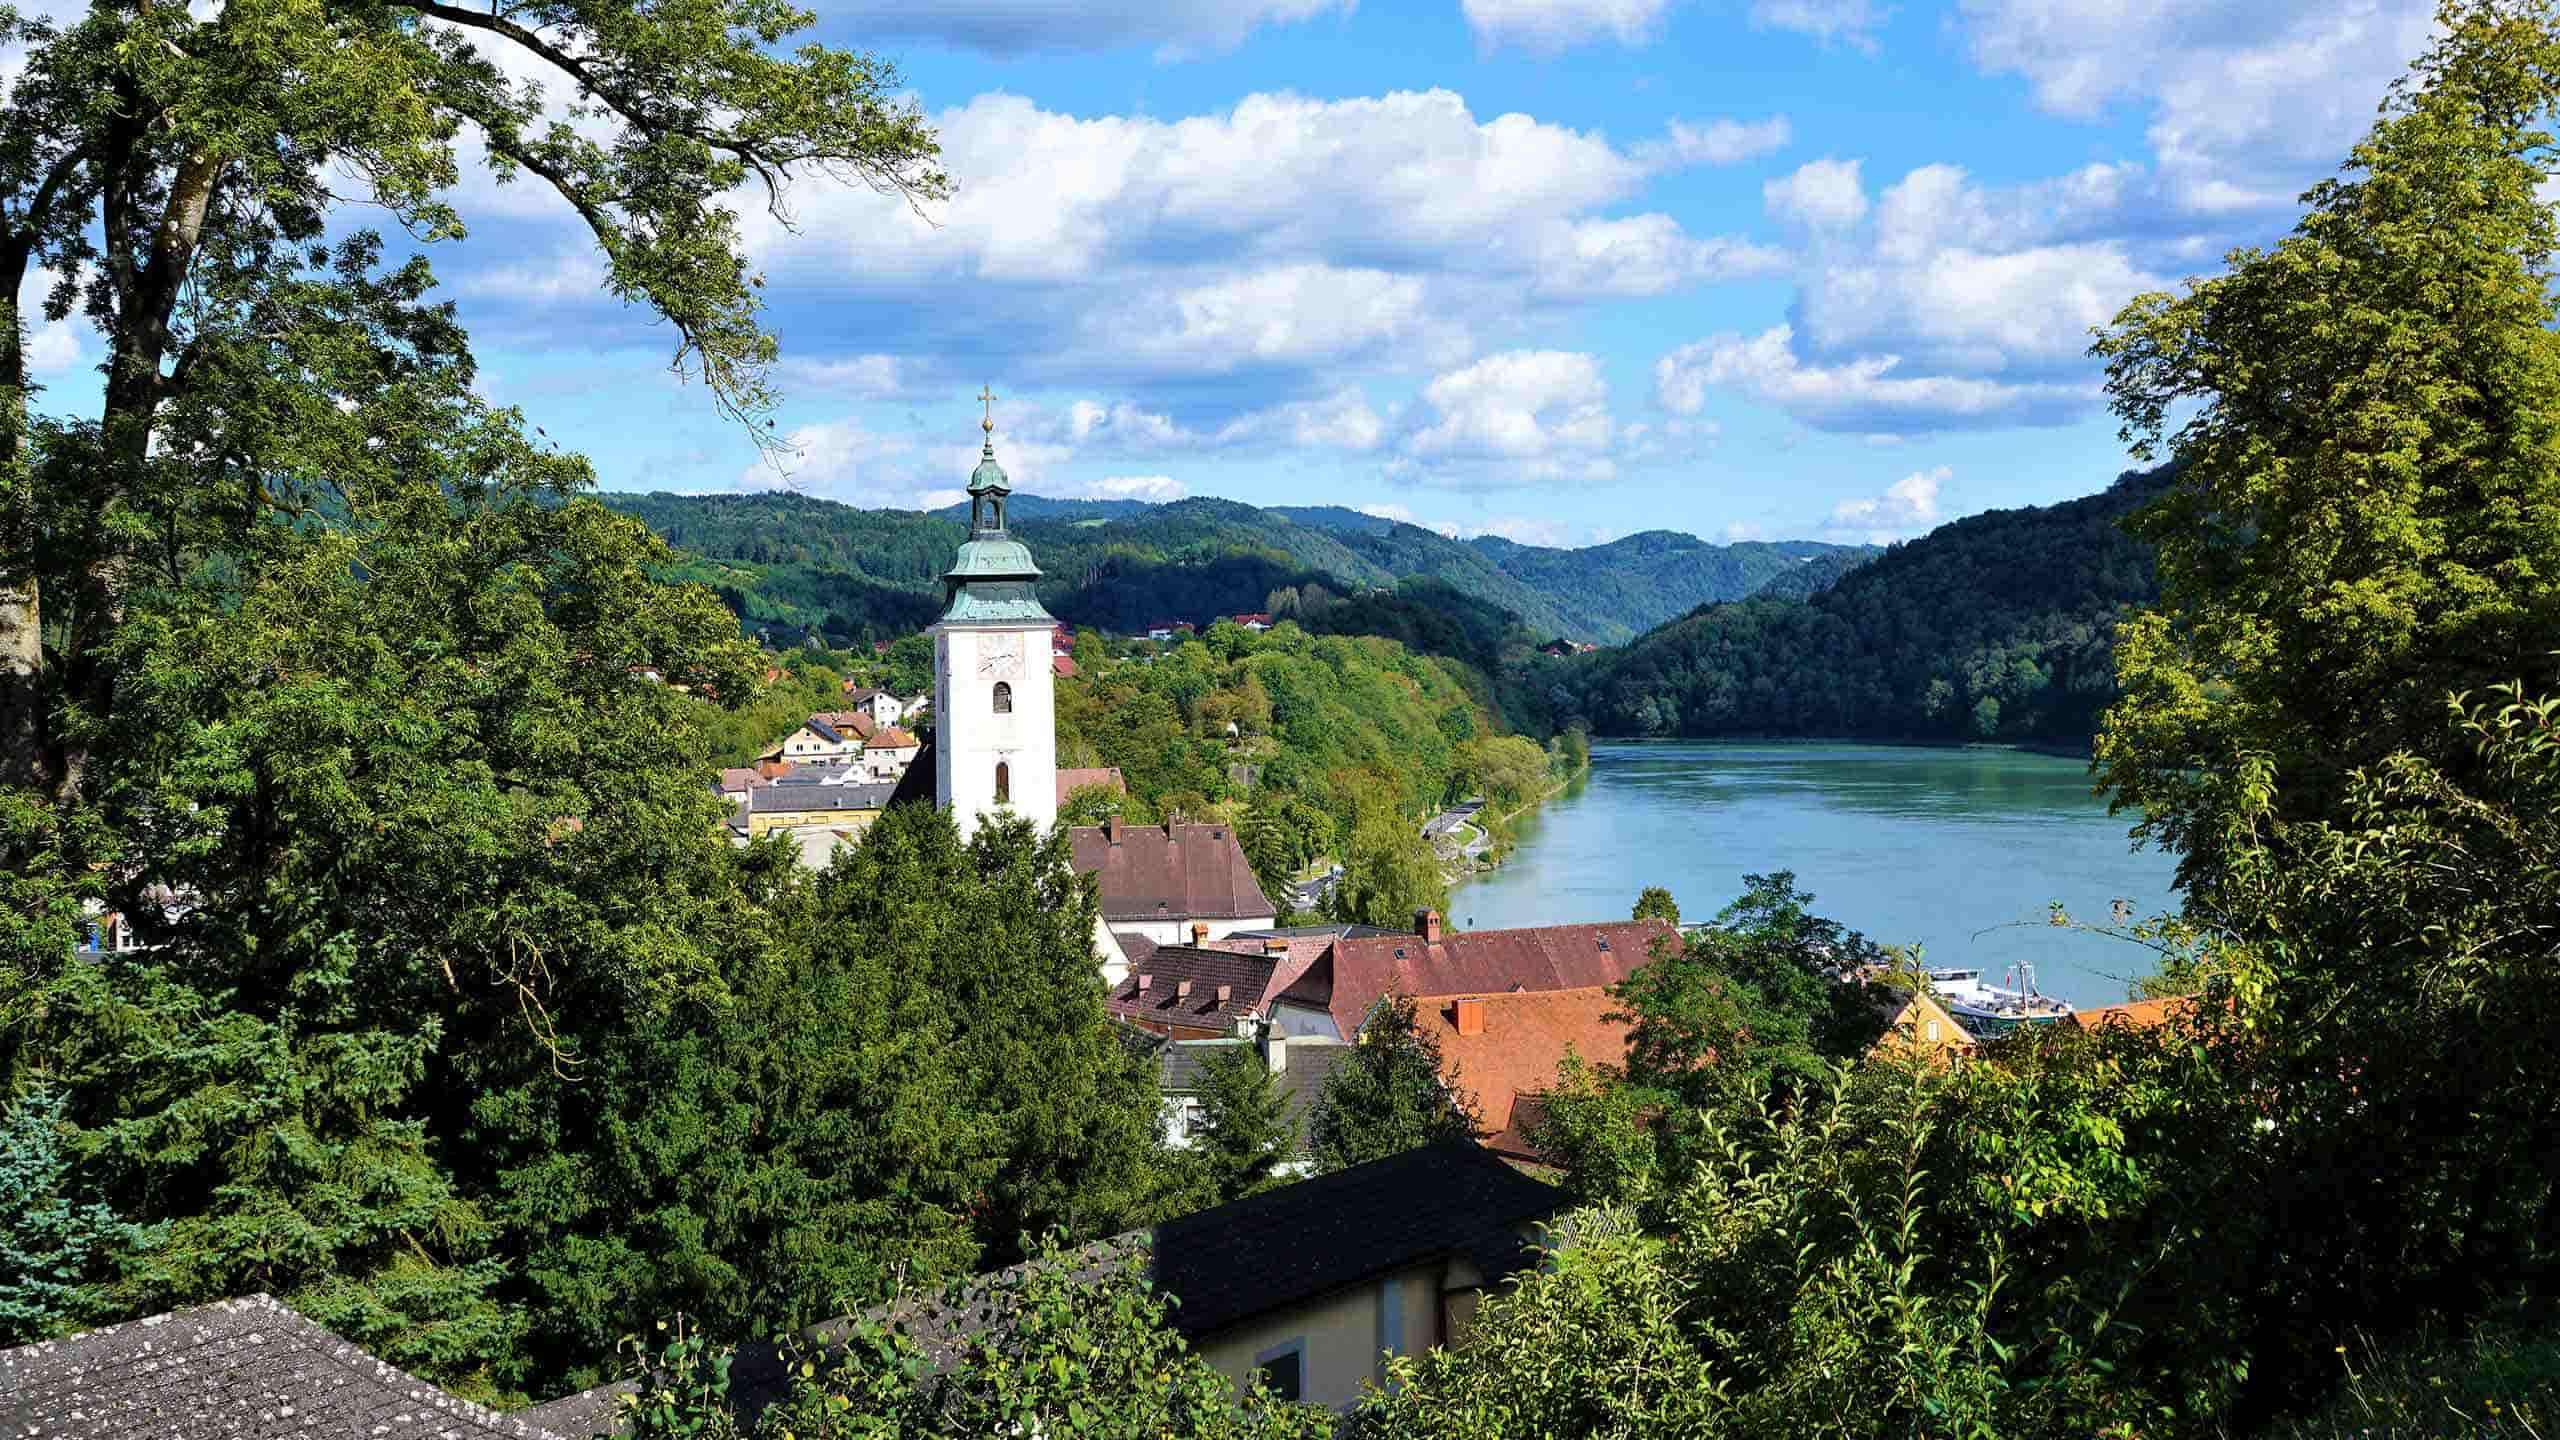 Active & Discovery Cruise On The Danube With Prague (Prague To Budapest) 10D9N